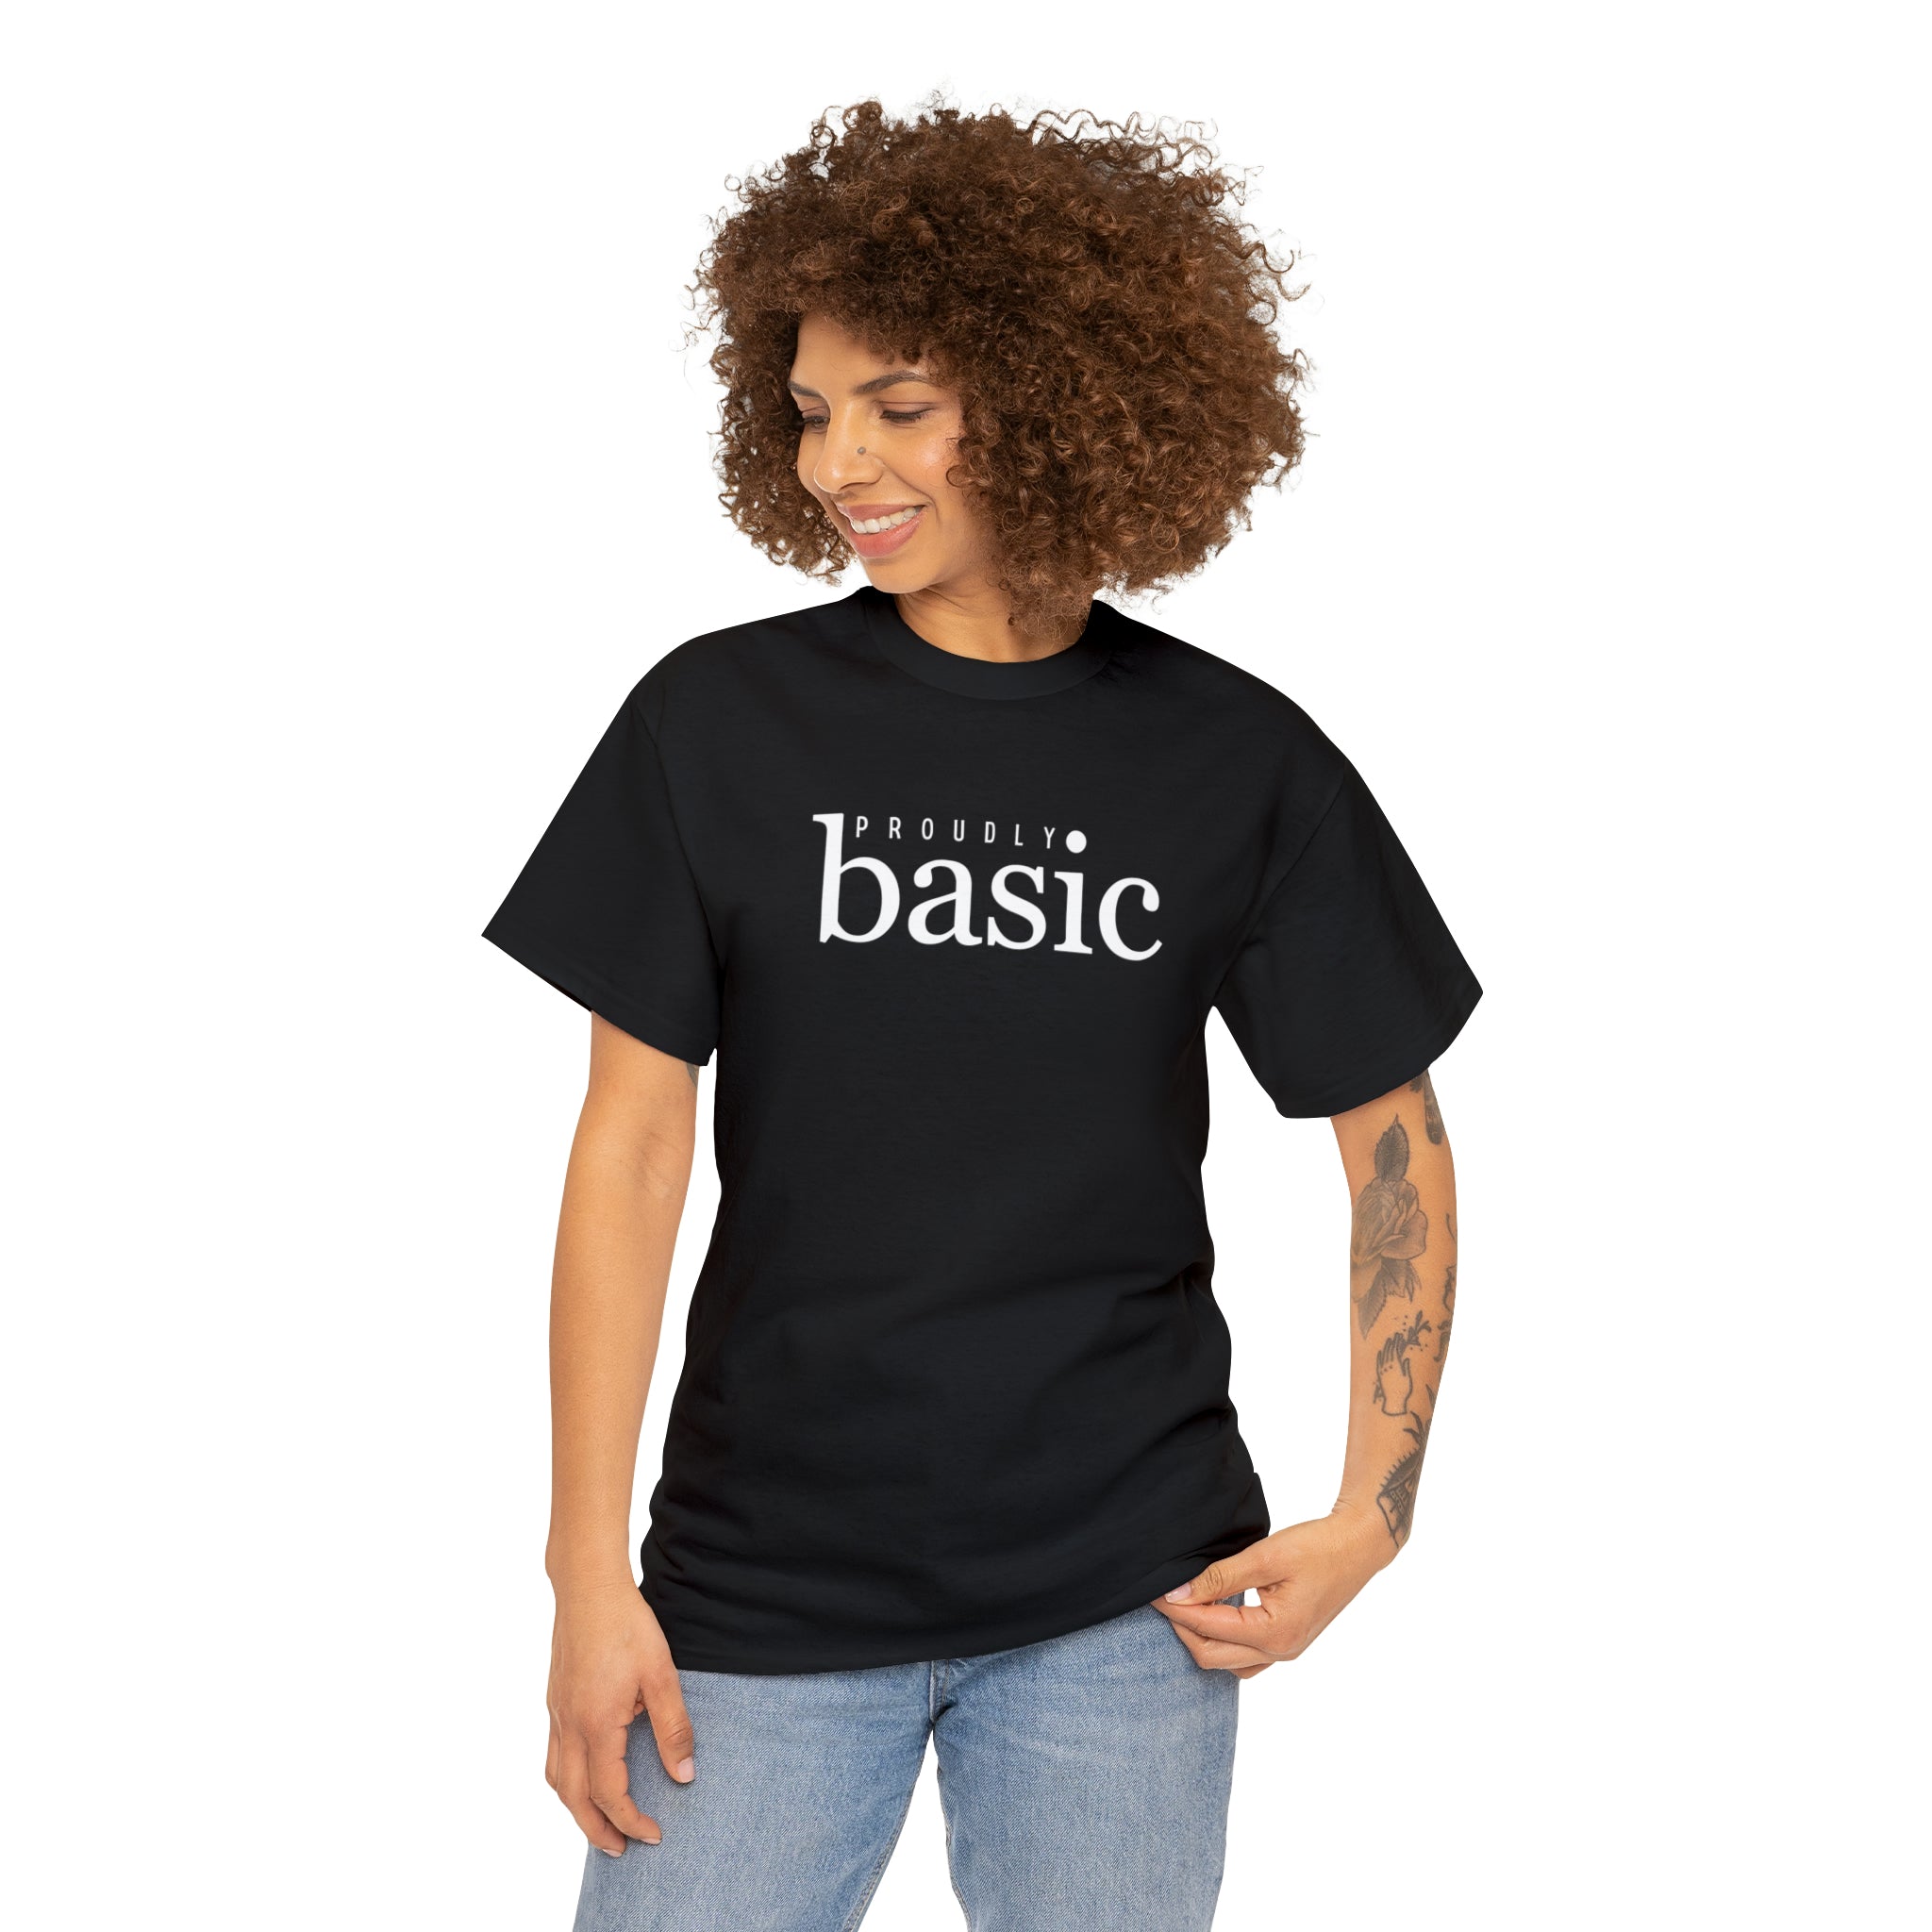  Proudly BASIC Relaxed-Fit Cotton T-Shirt, Female Empowerment Shirt, Cute Graphic T-shirt T-ShirtBlack5XL